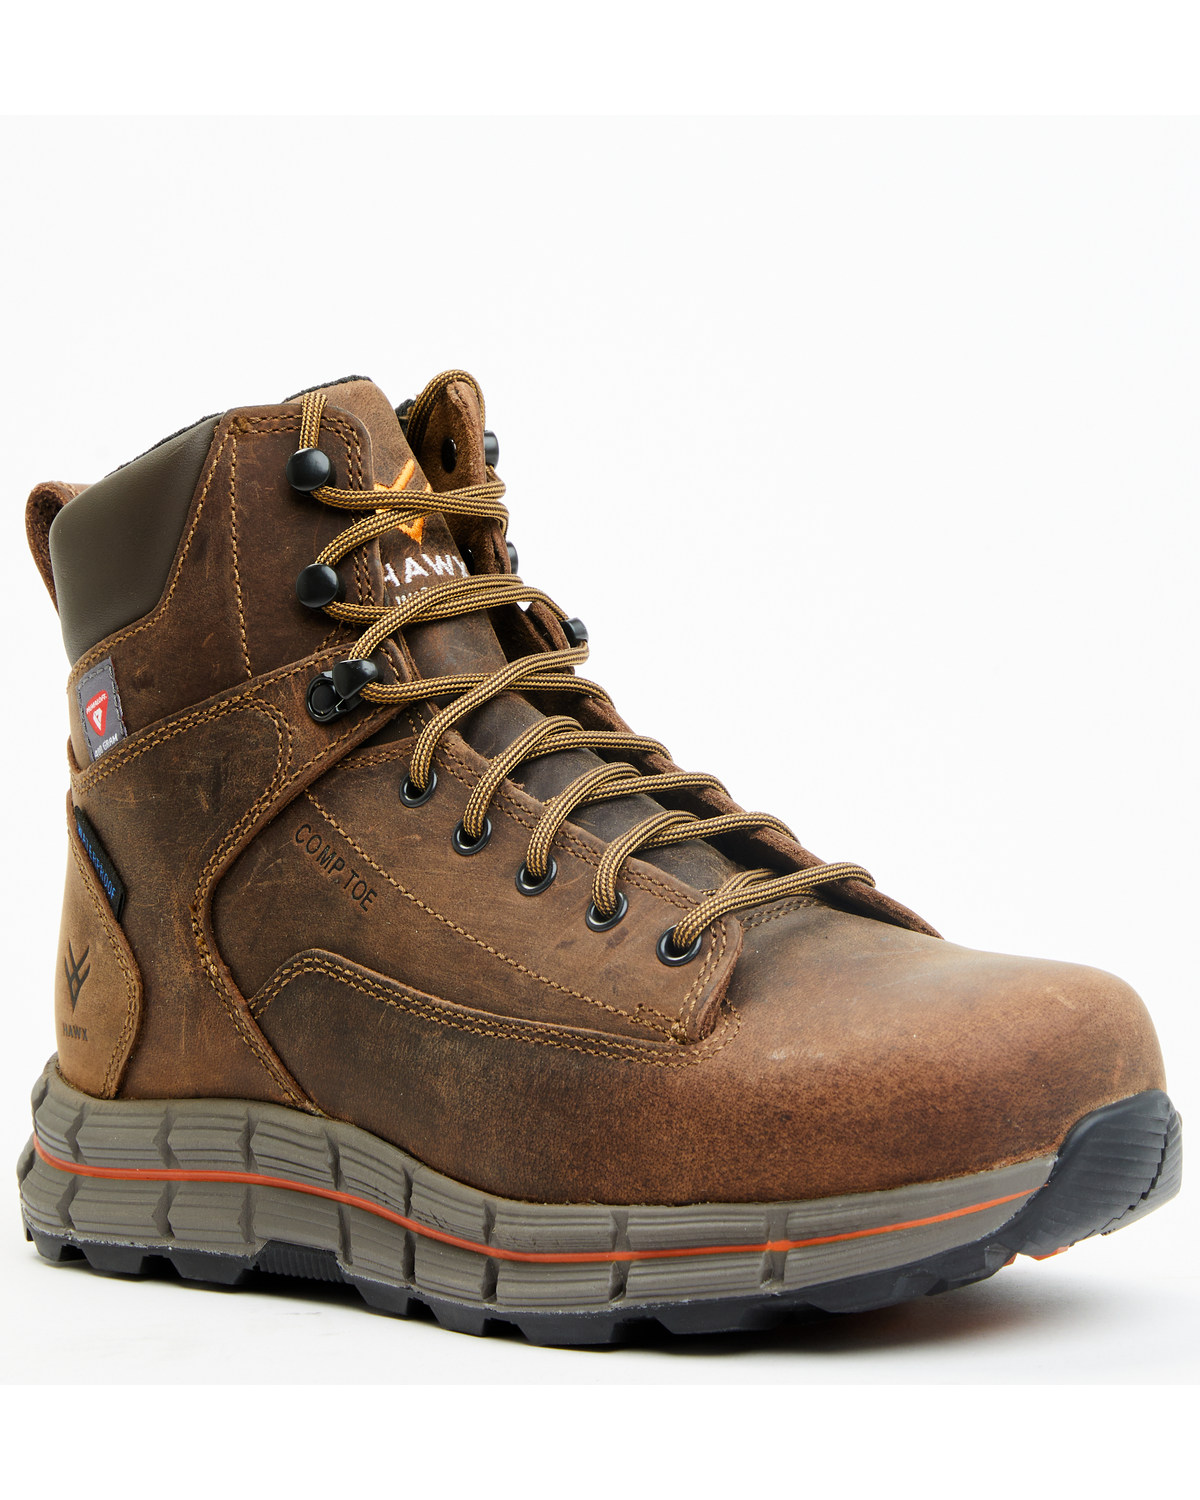 Hawx Men's 6" Insulated Lace-Up Waterproof Work Boots - Composite Toe